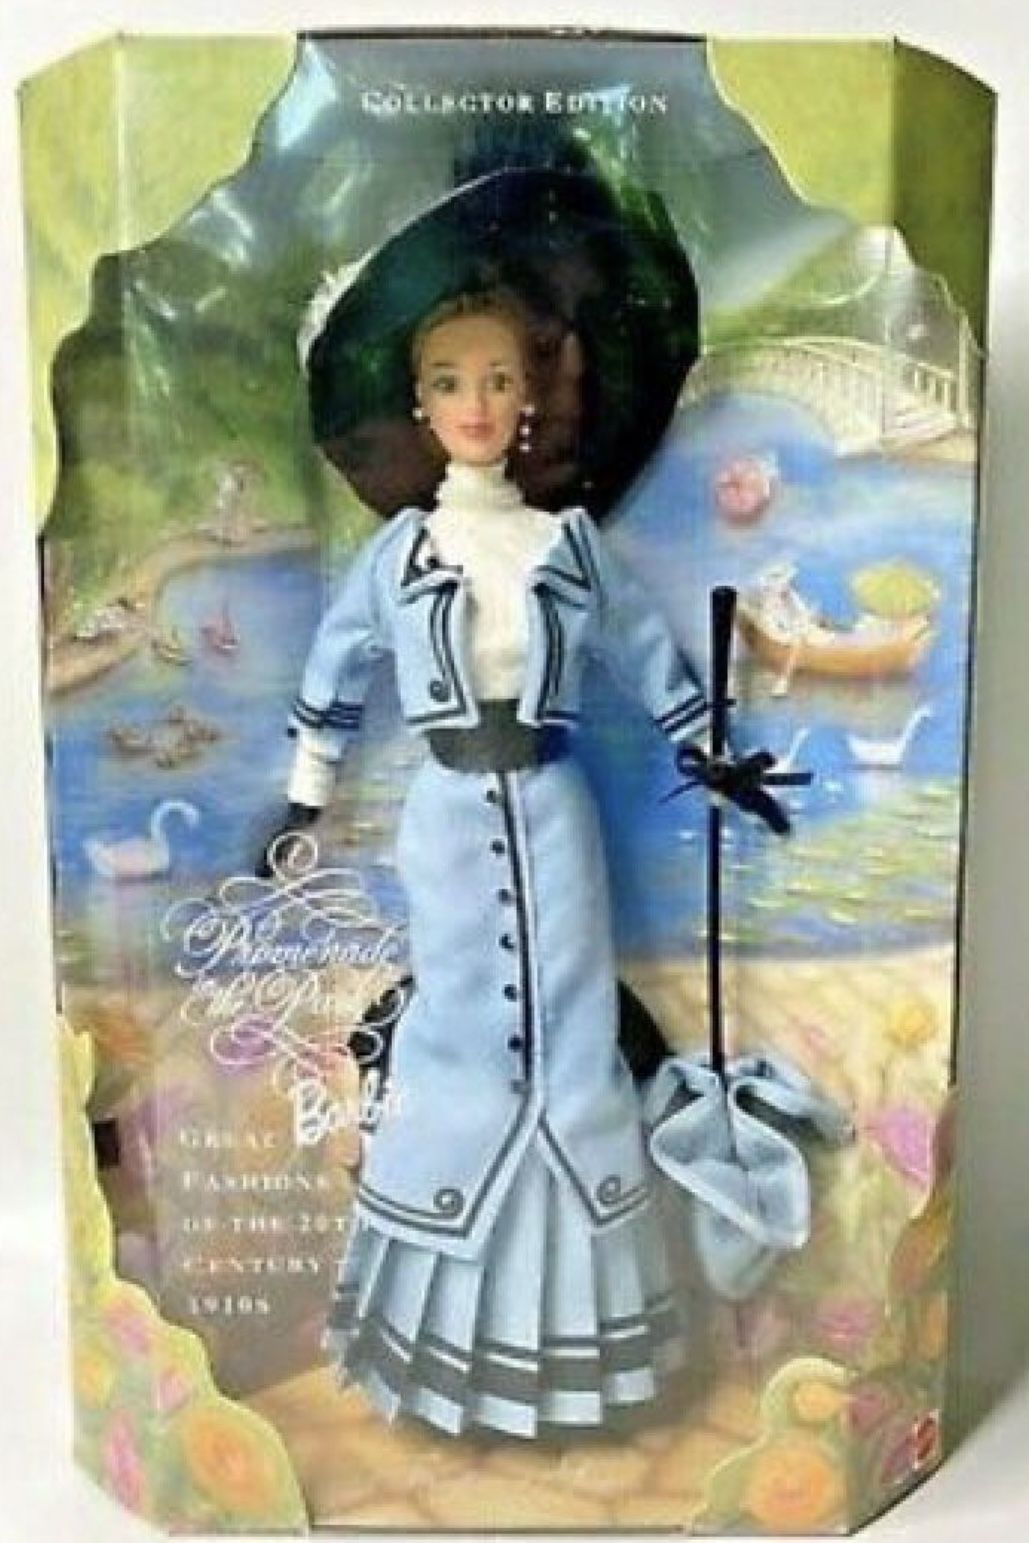 Barbie Promenade in the Park 1910's Doll Great Fashions of the 20th Century